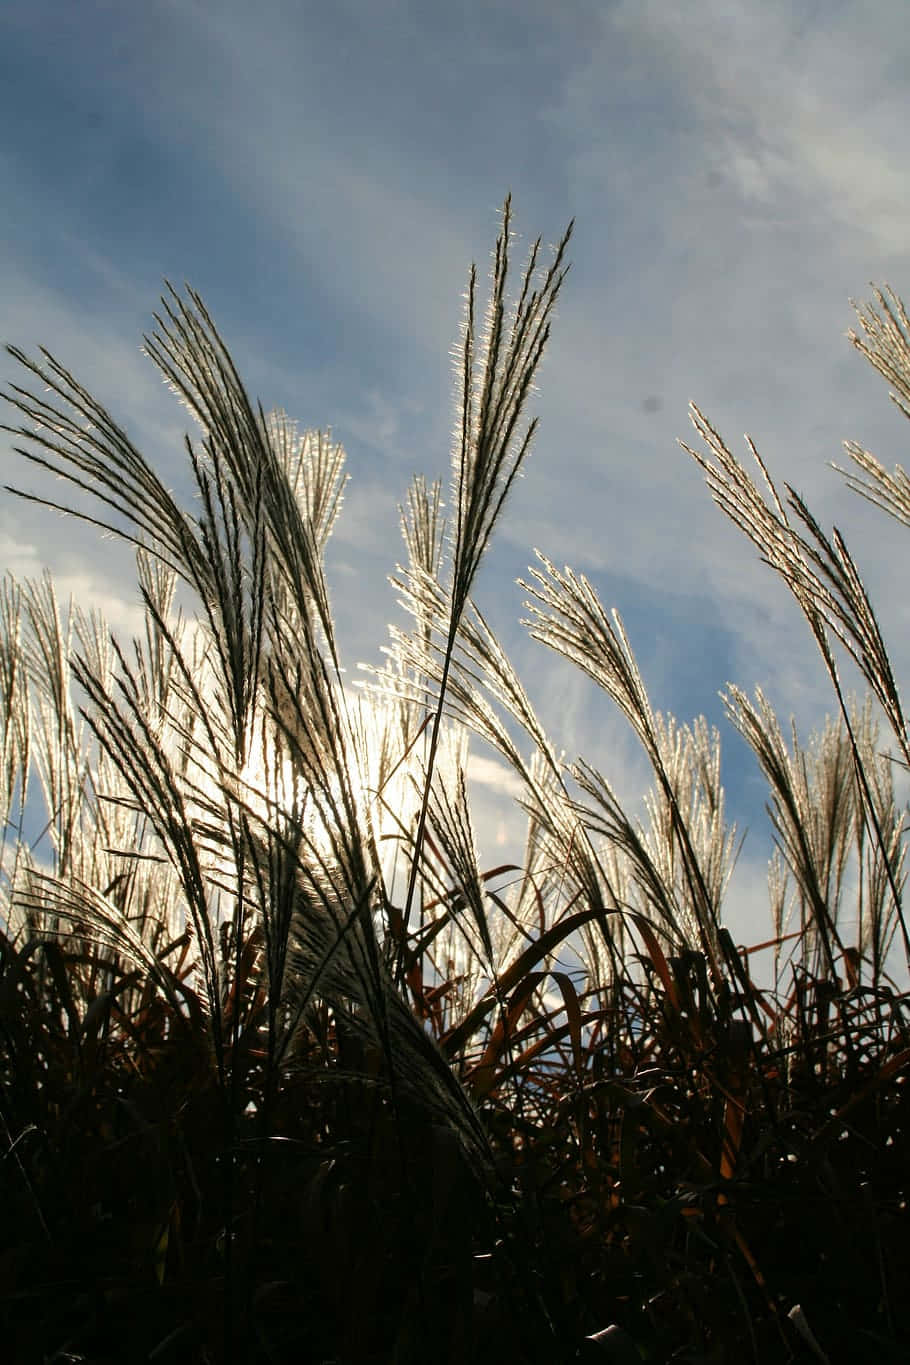 Inside The Field Of Pampas Grass Background